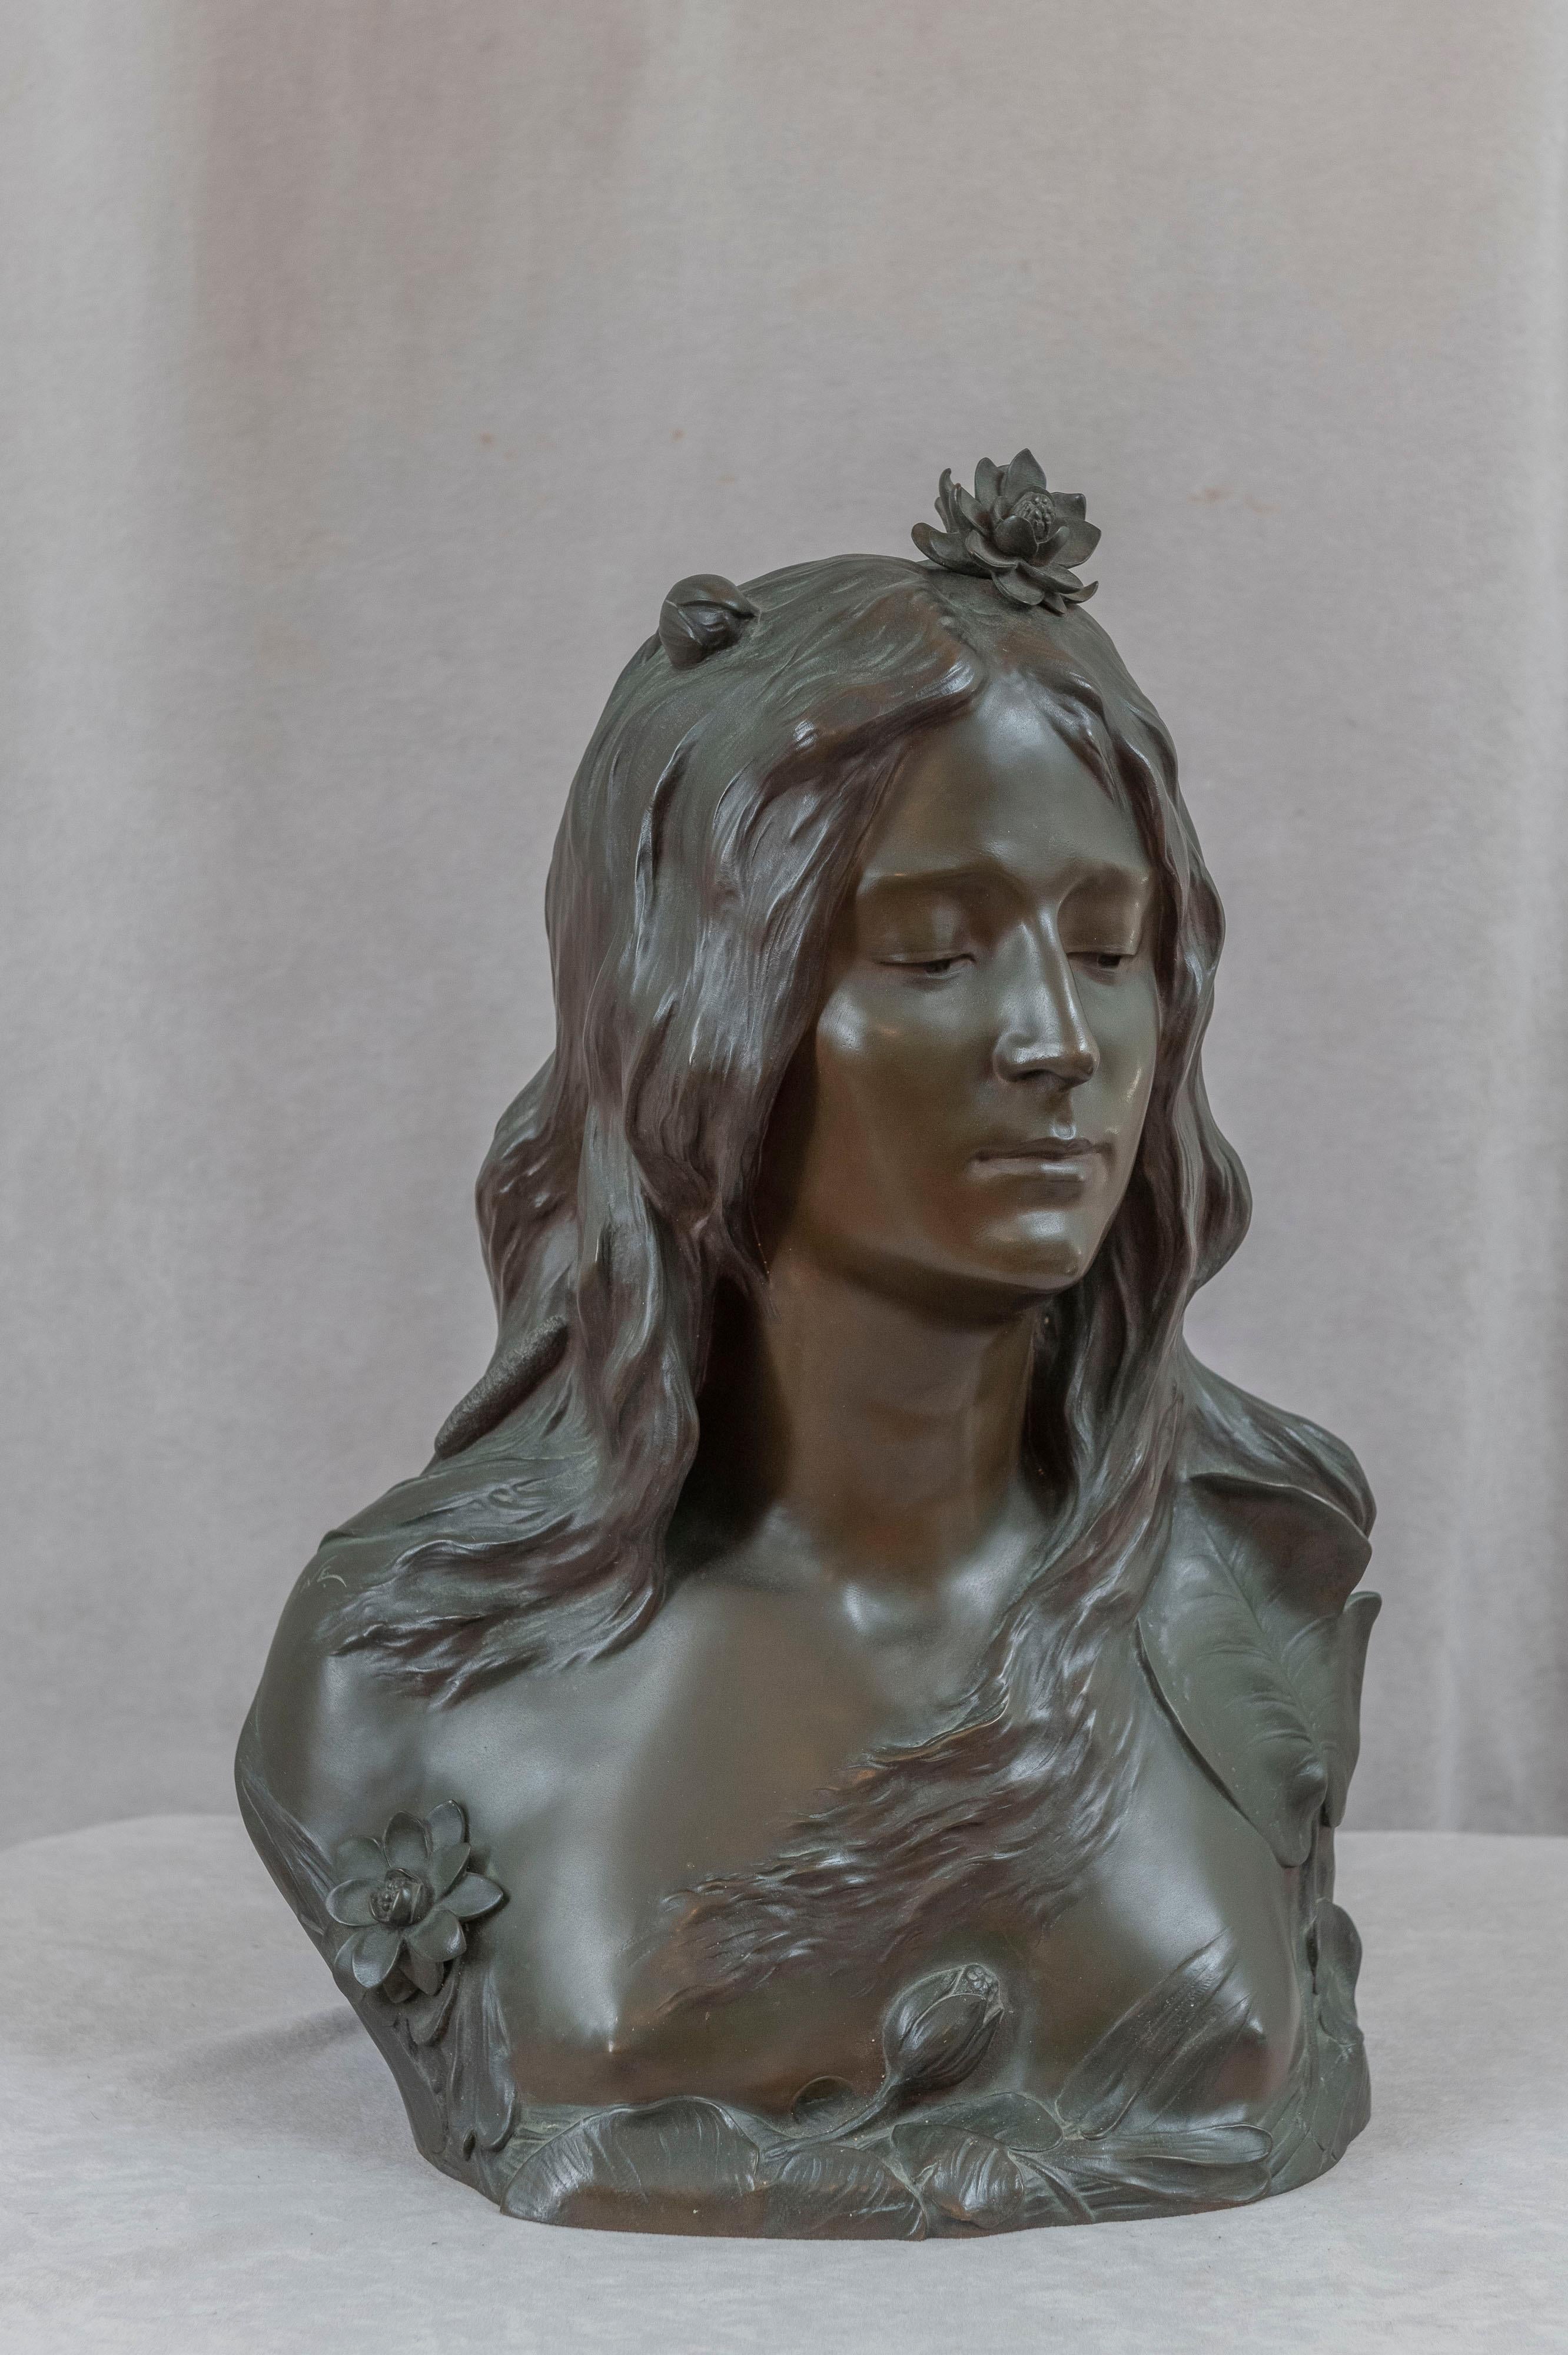  For the art nouveau lover, or anyone who loves beauty, here is a life size bronze beautifully cast young maiden finished in a warm rich patina. The young woman's countenance is so lovely and graceful. What an amazing piece to put in any room in